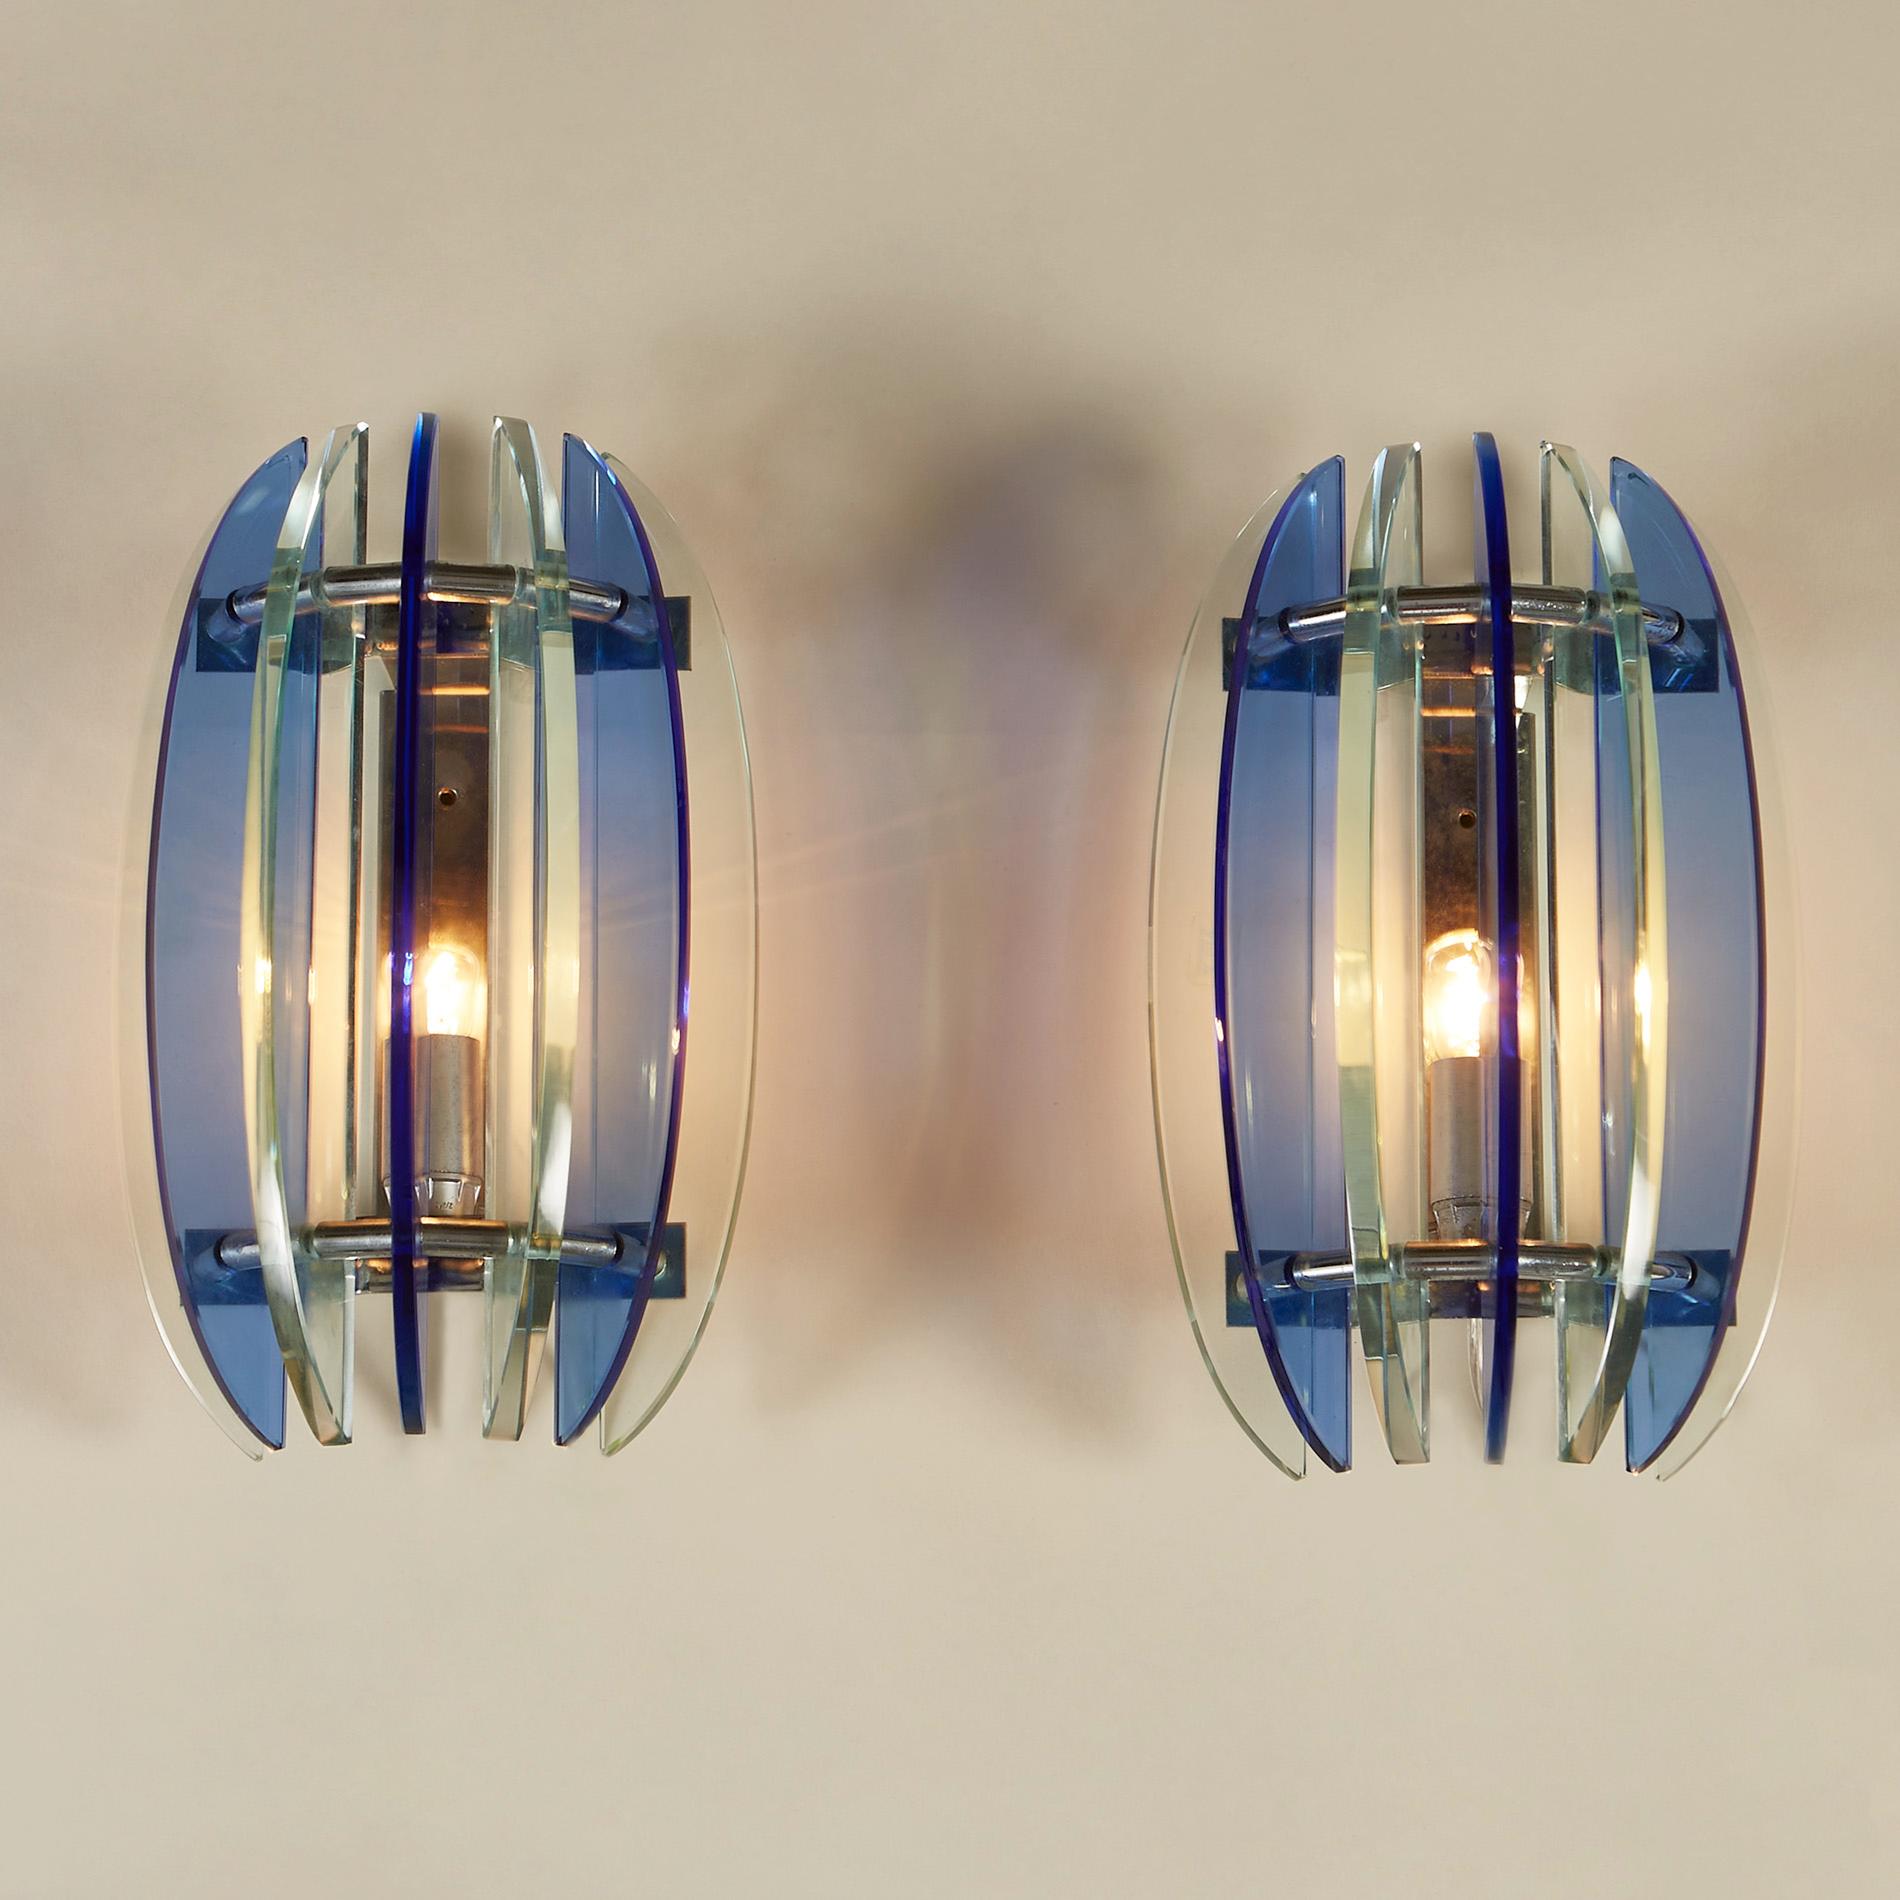 Pair of wall lights with alternating pale green and blue crystal glass pieces projecting out from chrome backplate.